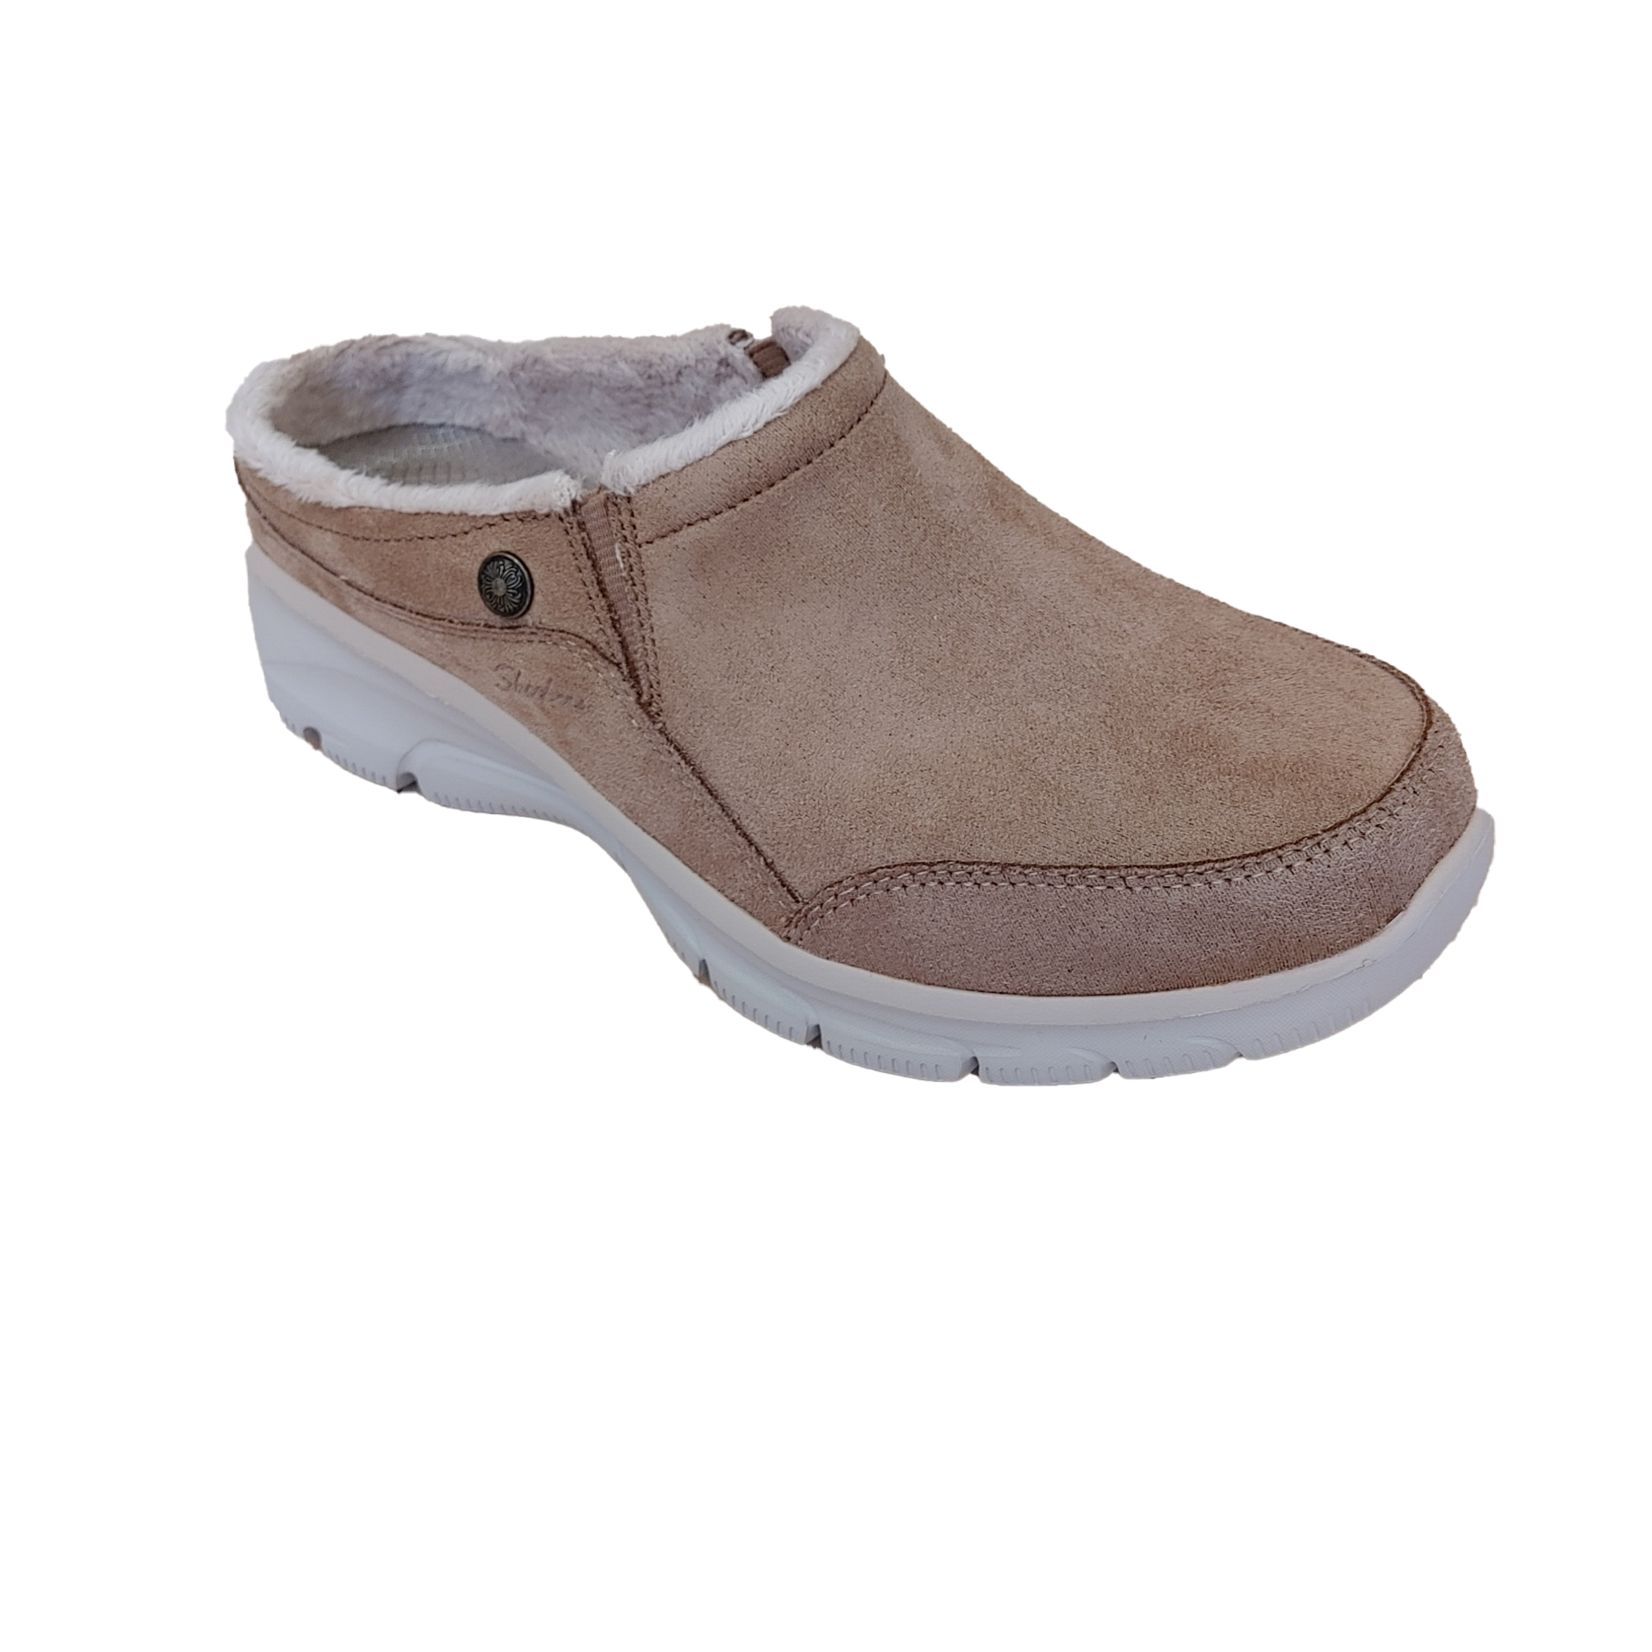 Skechers Relaxed fit, air cooled, light weight memory foam clog, avalible in two colors. Skechers